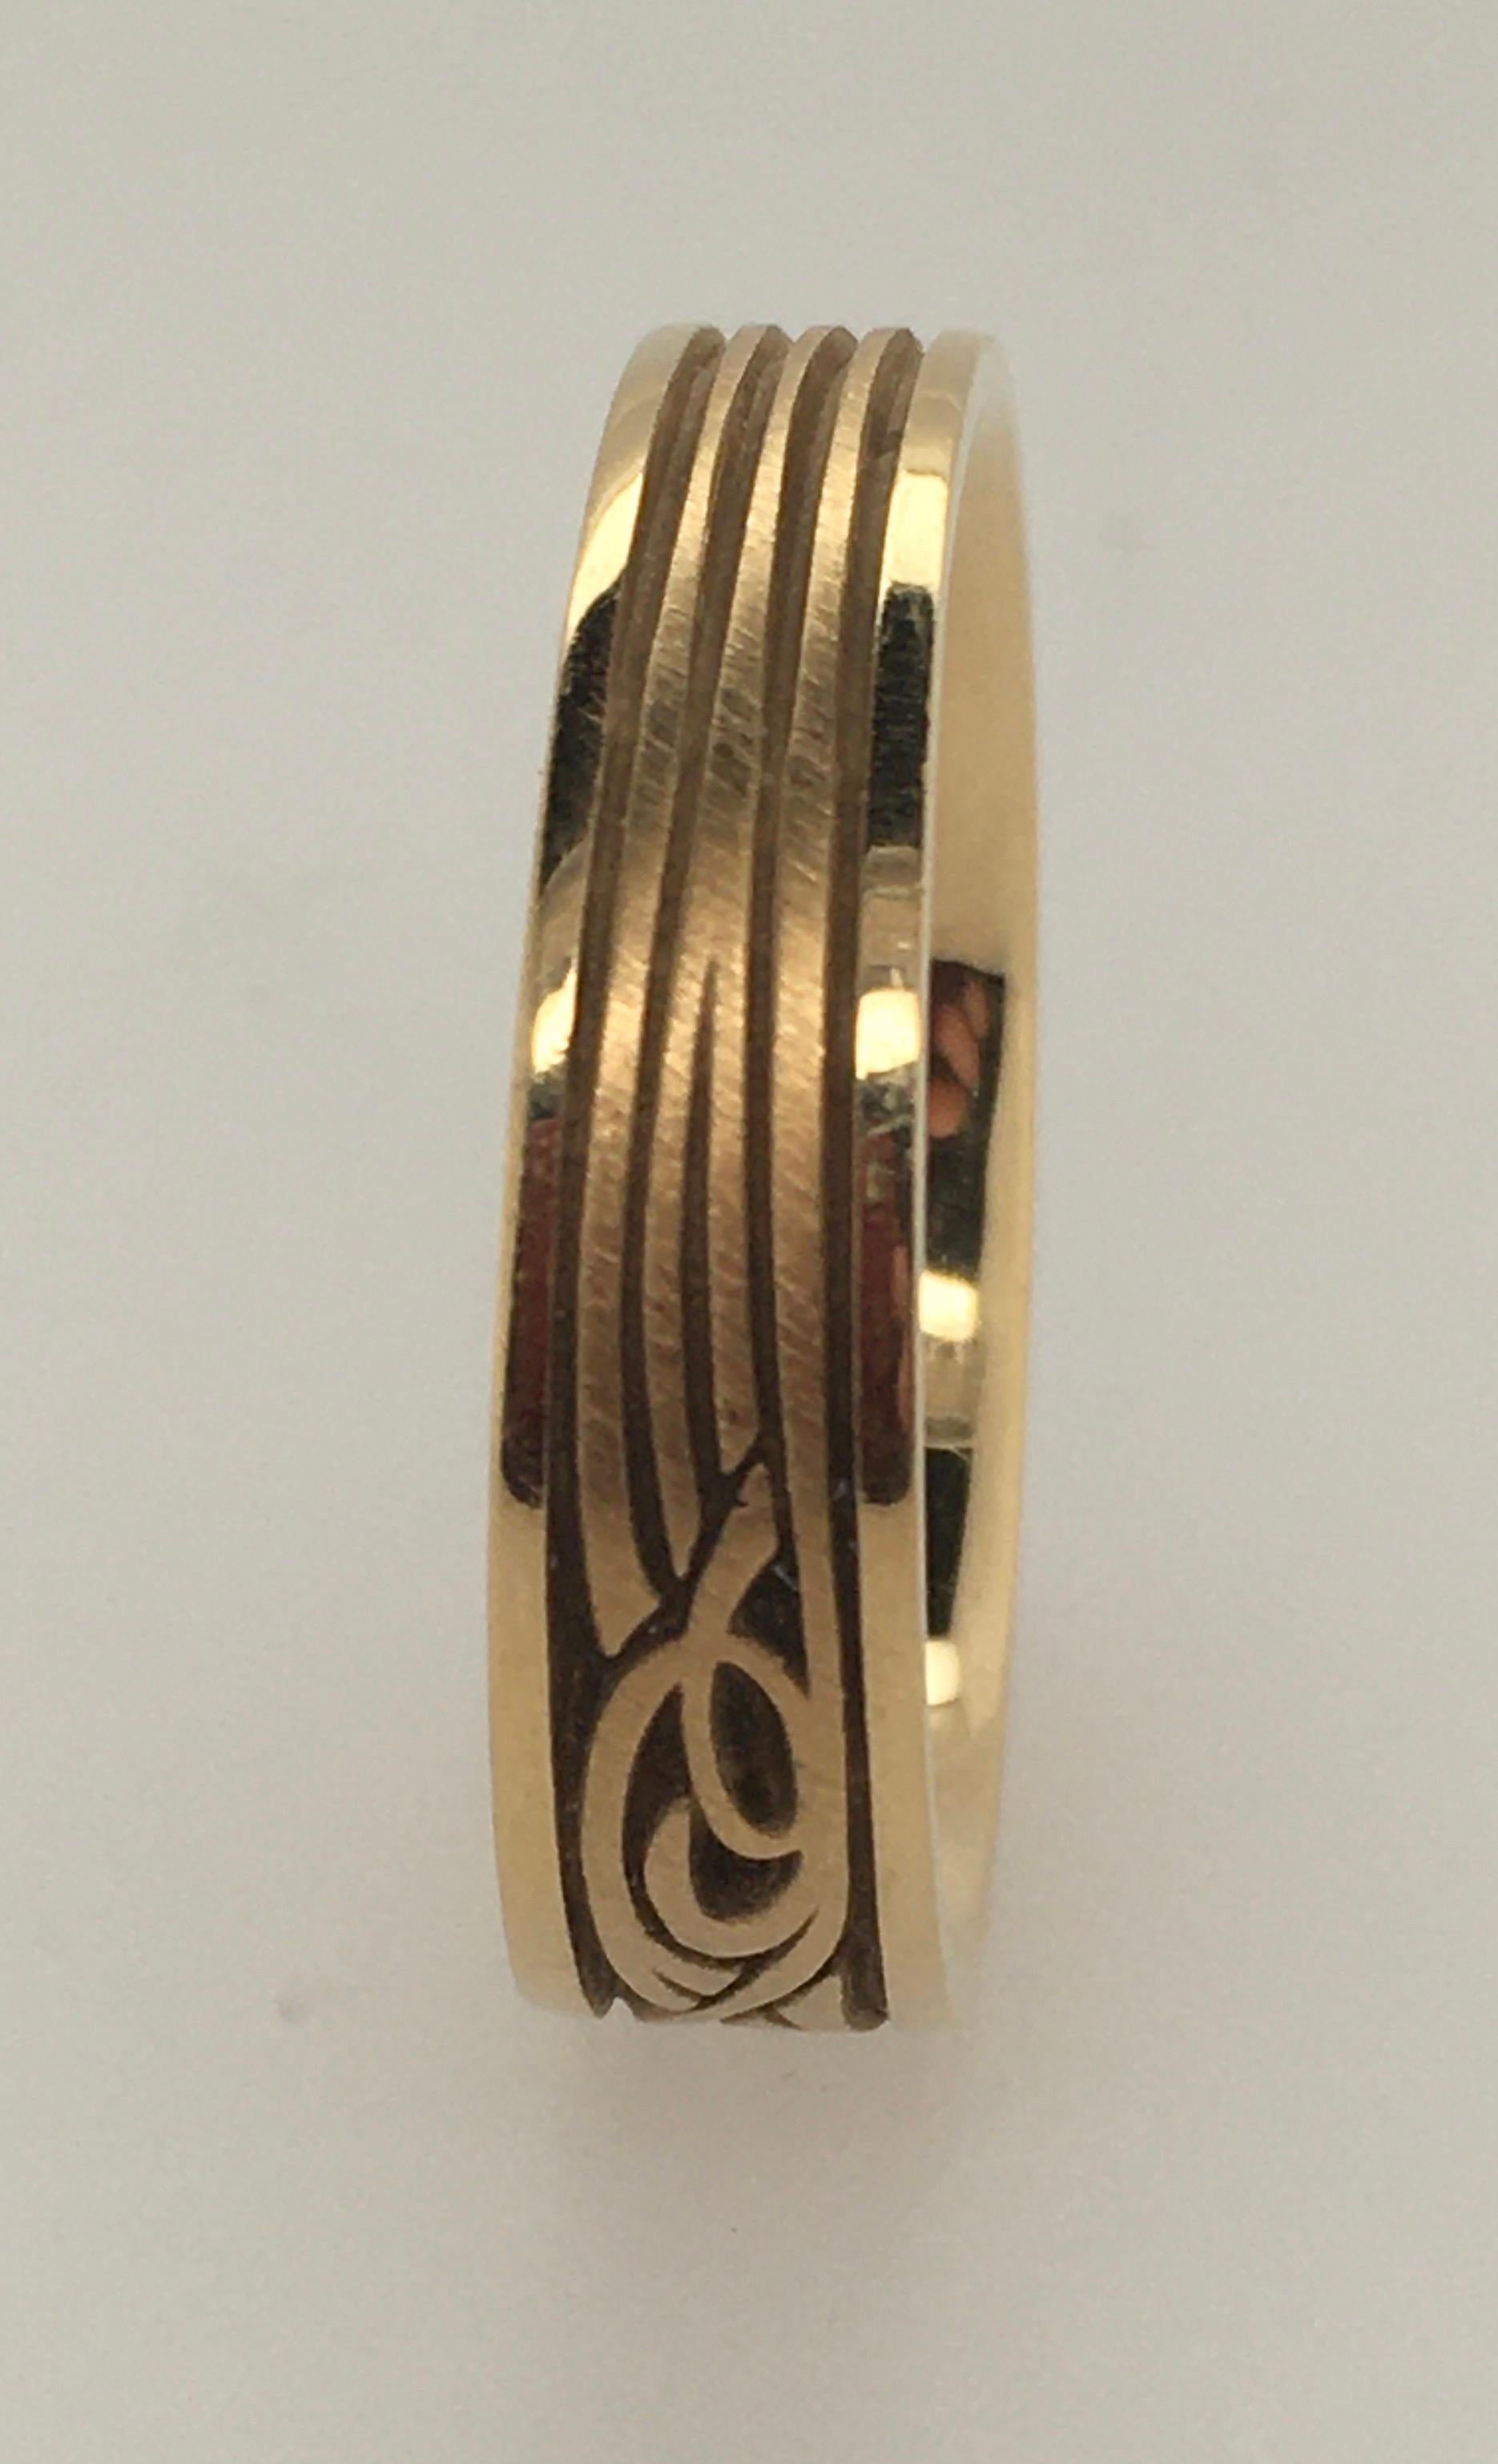 STUDIO 311 Narrow Papyrus Yellow Gold Men's Wedding Band In Excellent Condition For Sale In Kennebunkport, ME